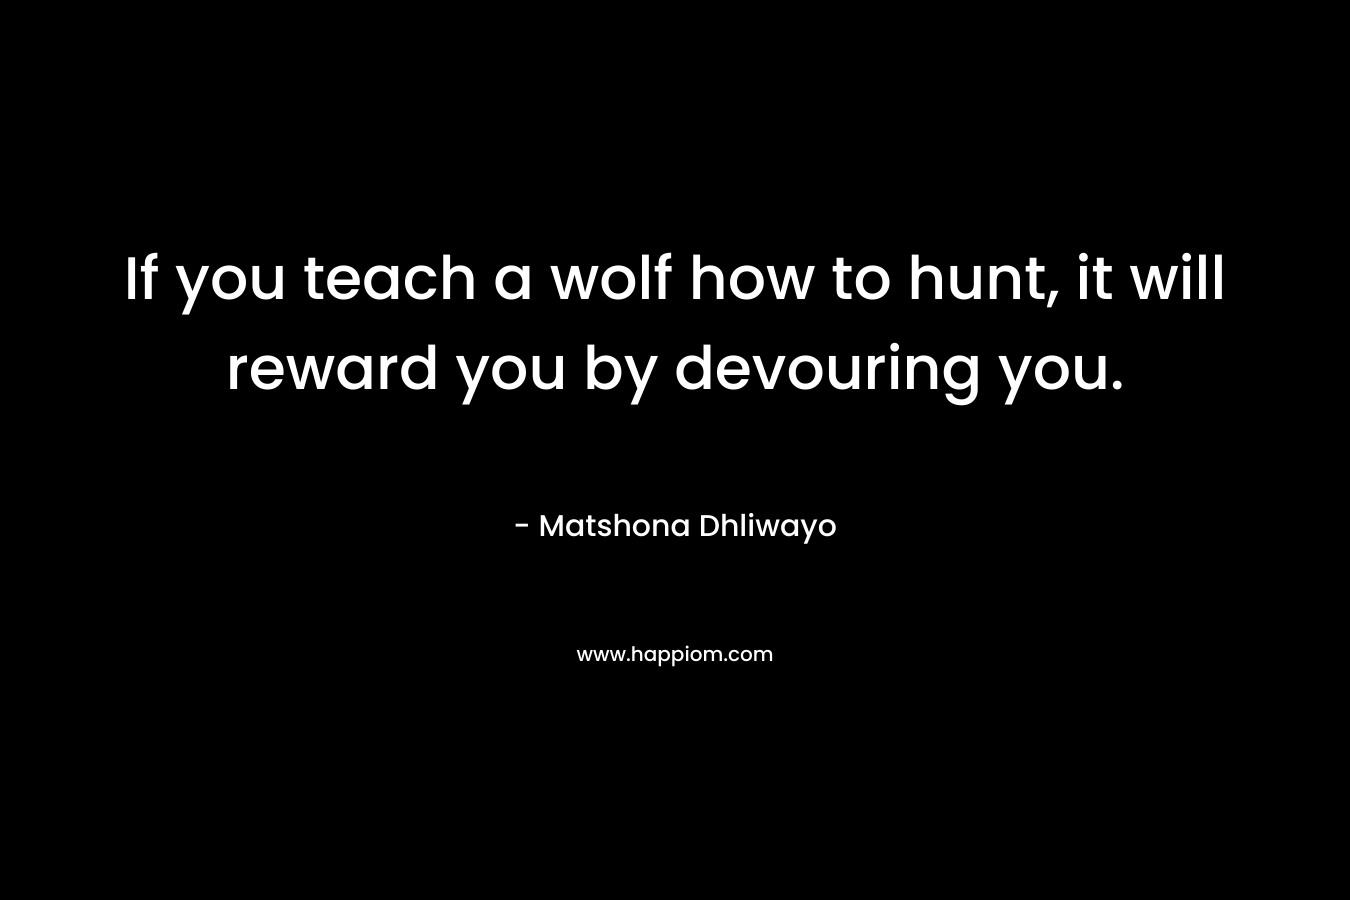 If you teach a wolf how to hunt, it will reward you by devouring you.